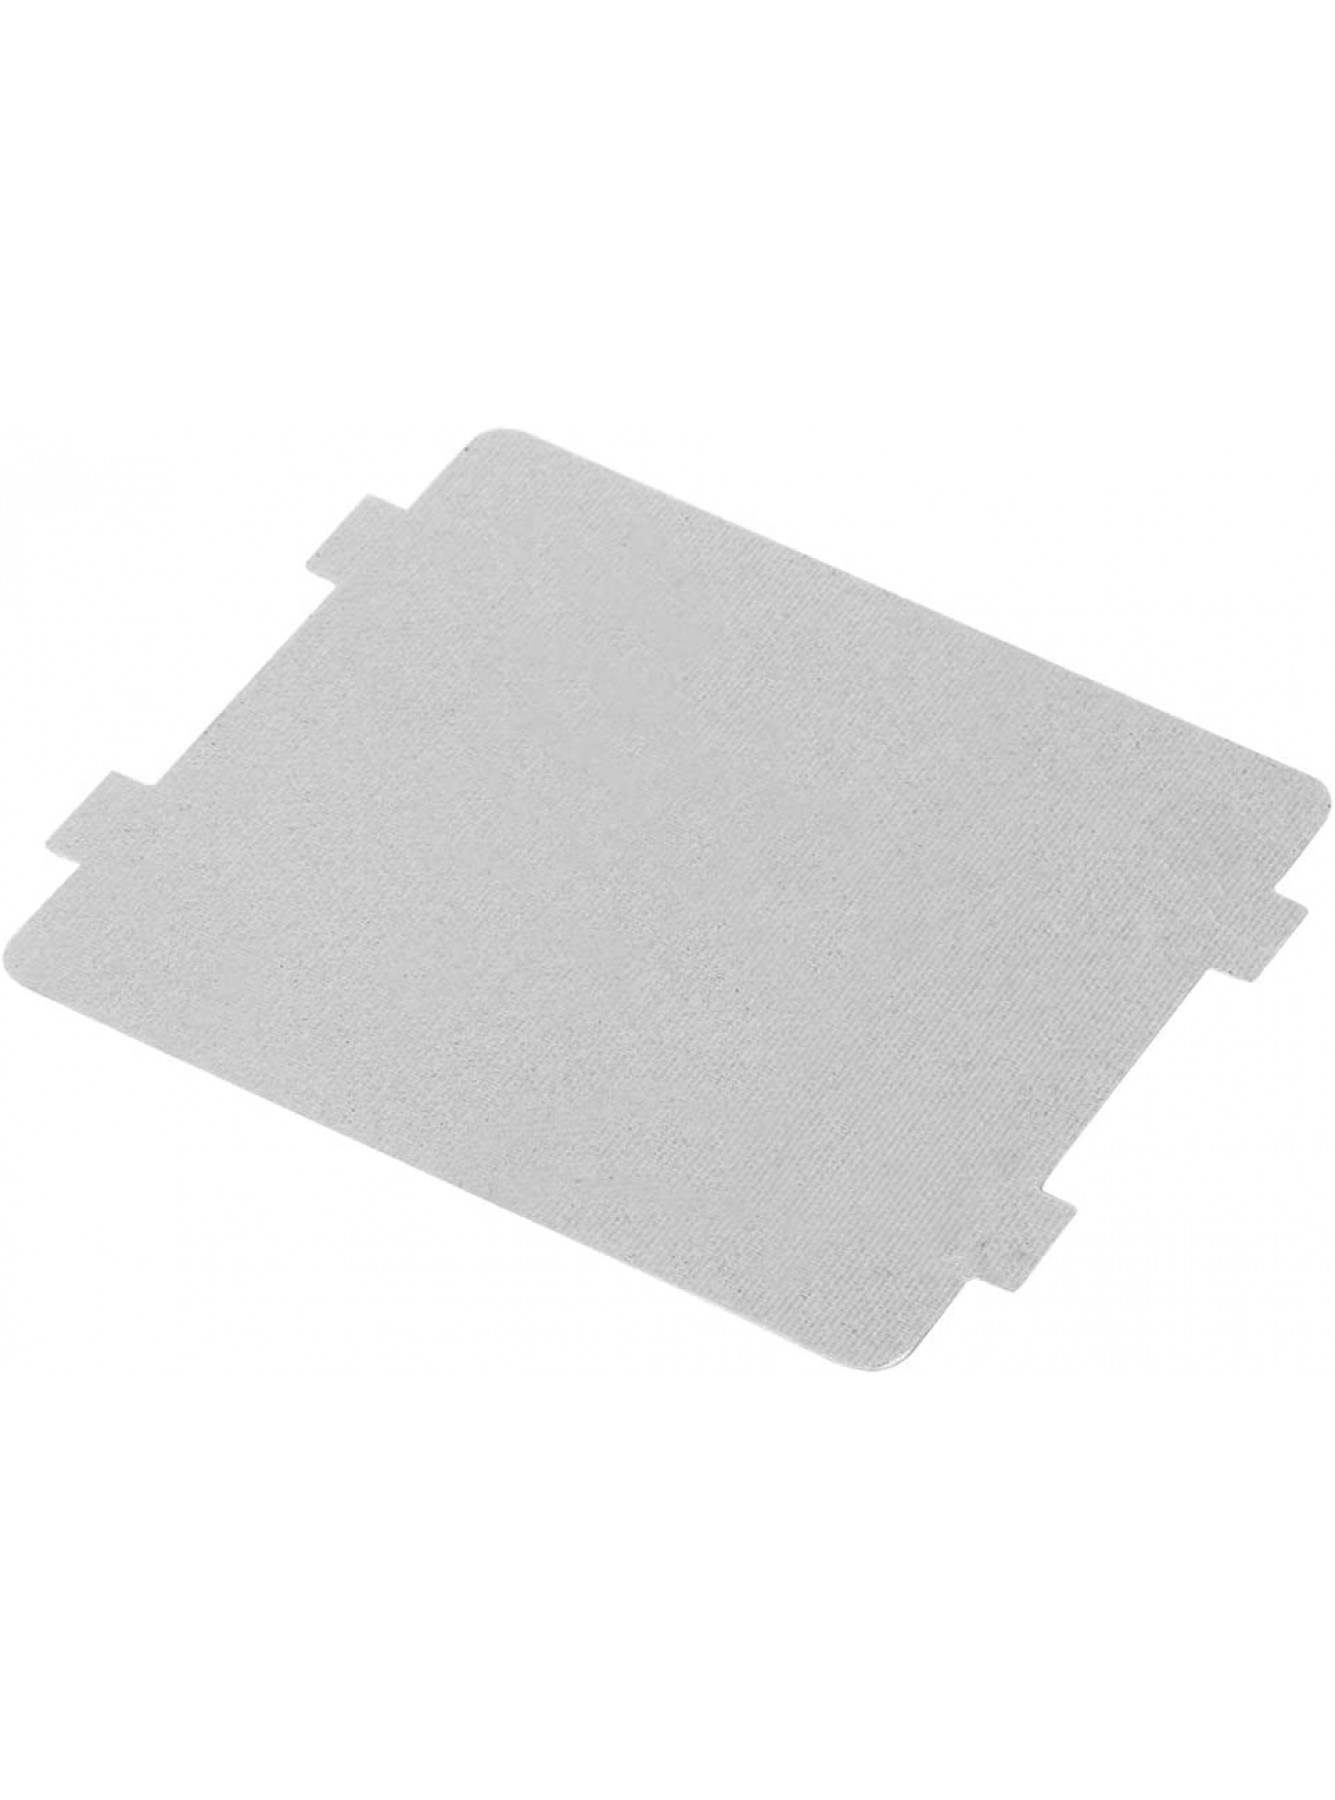 Yunxwd 10Pcs Household Microwave Oven Thickened Mica Plate Sheet Microwave Accessory Universal Waveguide Cover Replacement Repairing Home Cooking Replacement Mat - DYGV1DQE